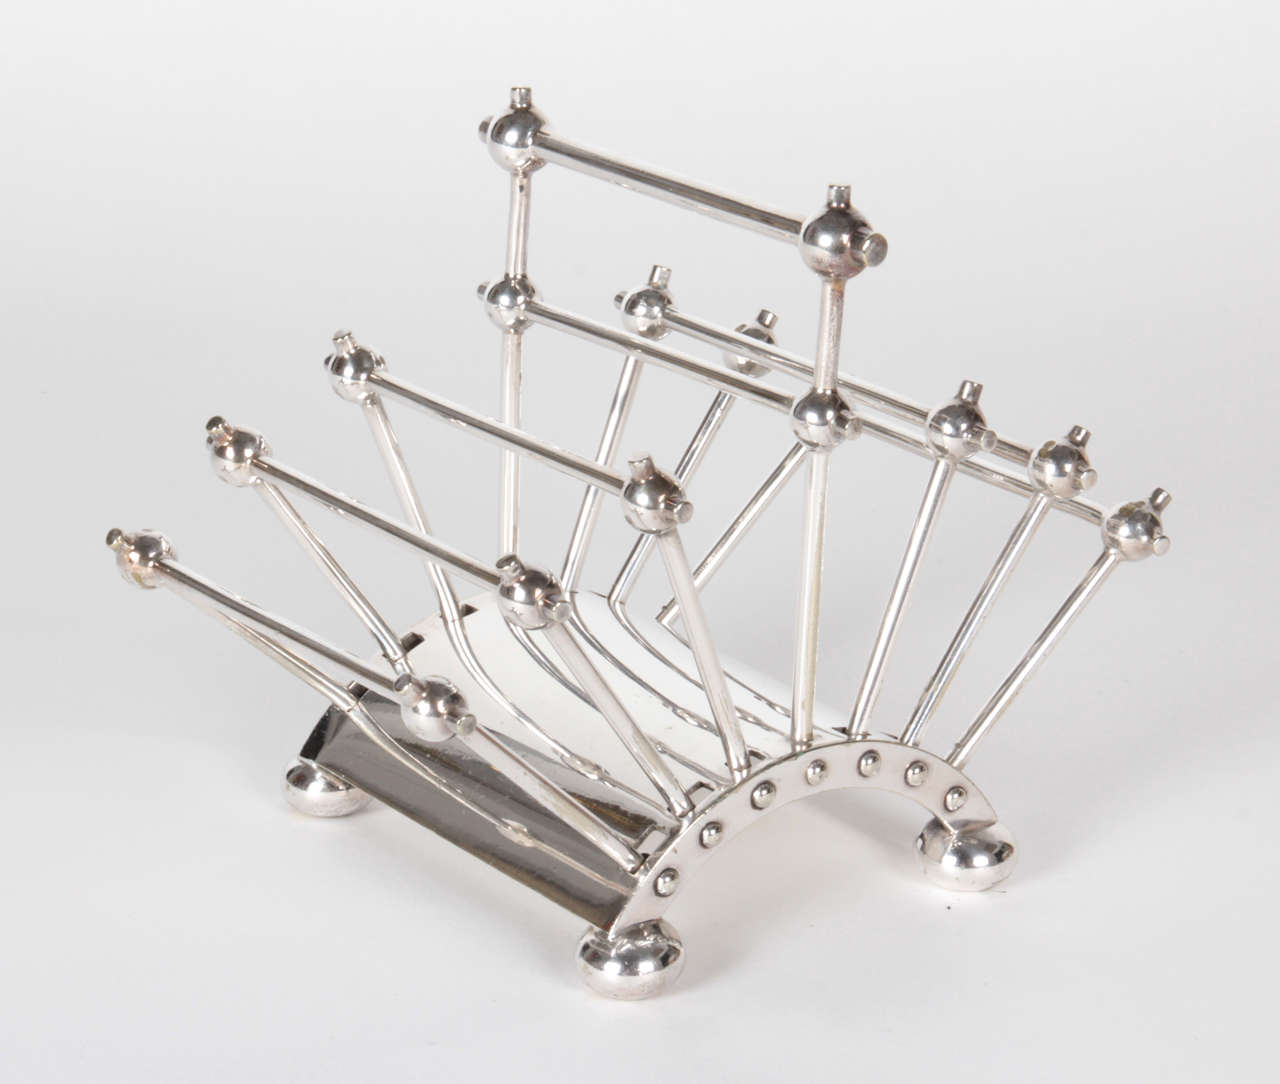 CHRISTOPHER DRESSER  (1834-1904)  UK
HUKIN & HEATH   Birmingham, England

Adjustable toast or letter rack 1881

Silver-plate (articulated model)

Marks: H&H, 2555, stylized fleur-de-lis touch mark

There is another model of this toast